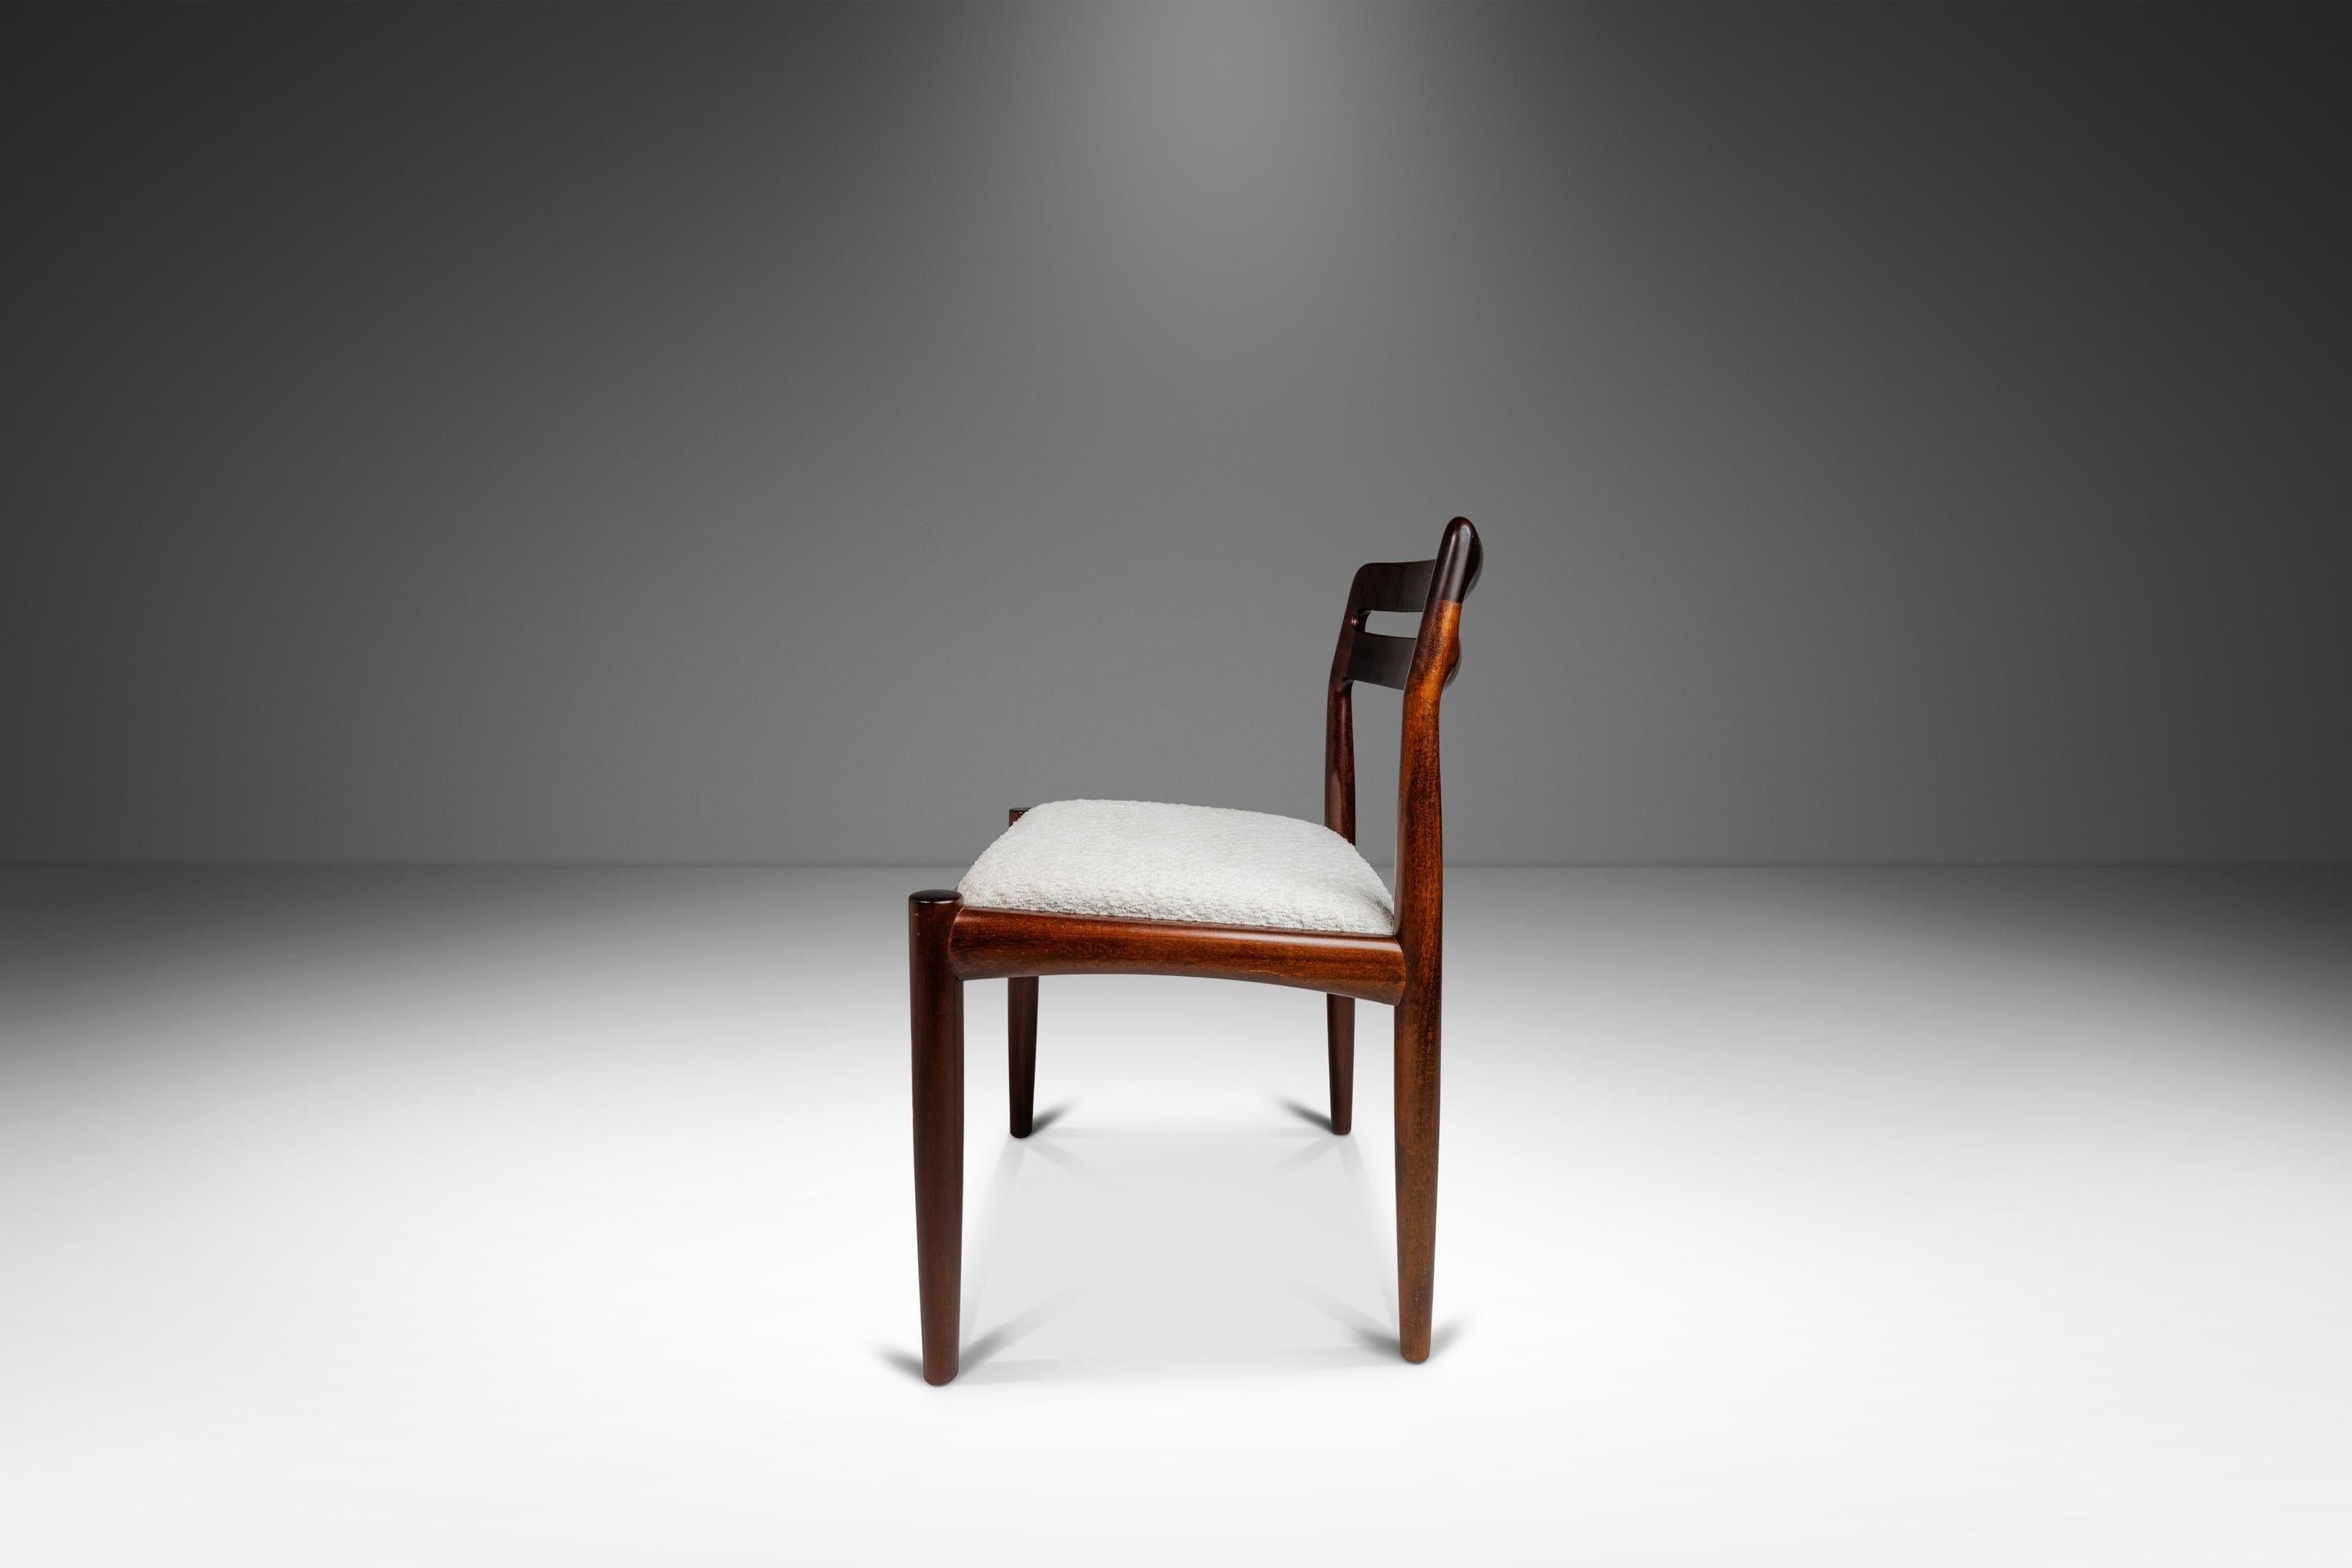 Danish Set of 4 Model 382 Dining Chairs in Mahogany by H.W. Klein, Denmark, c. 1960s